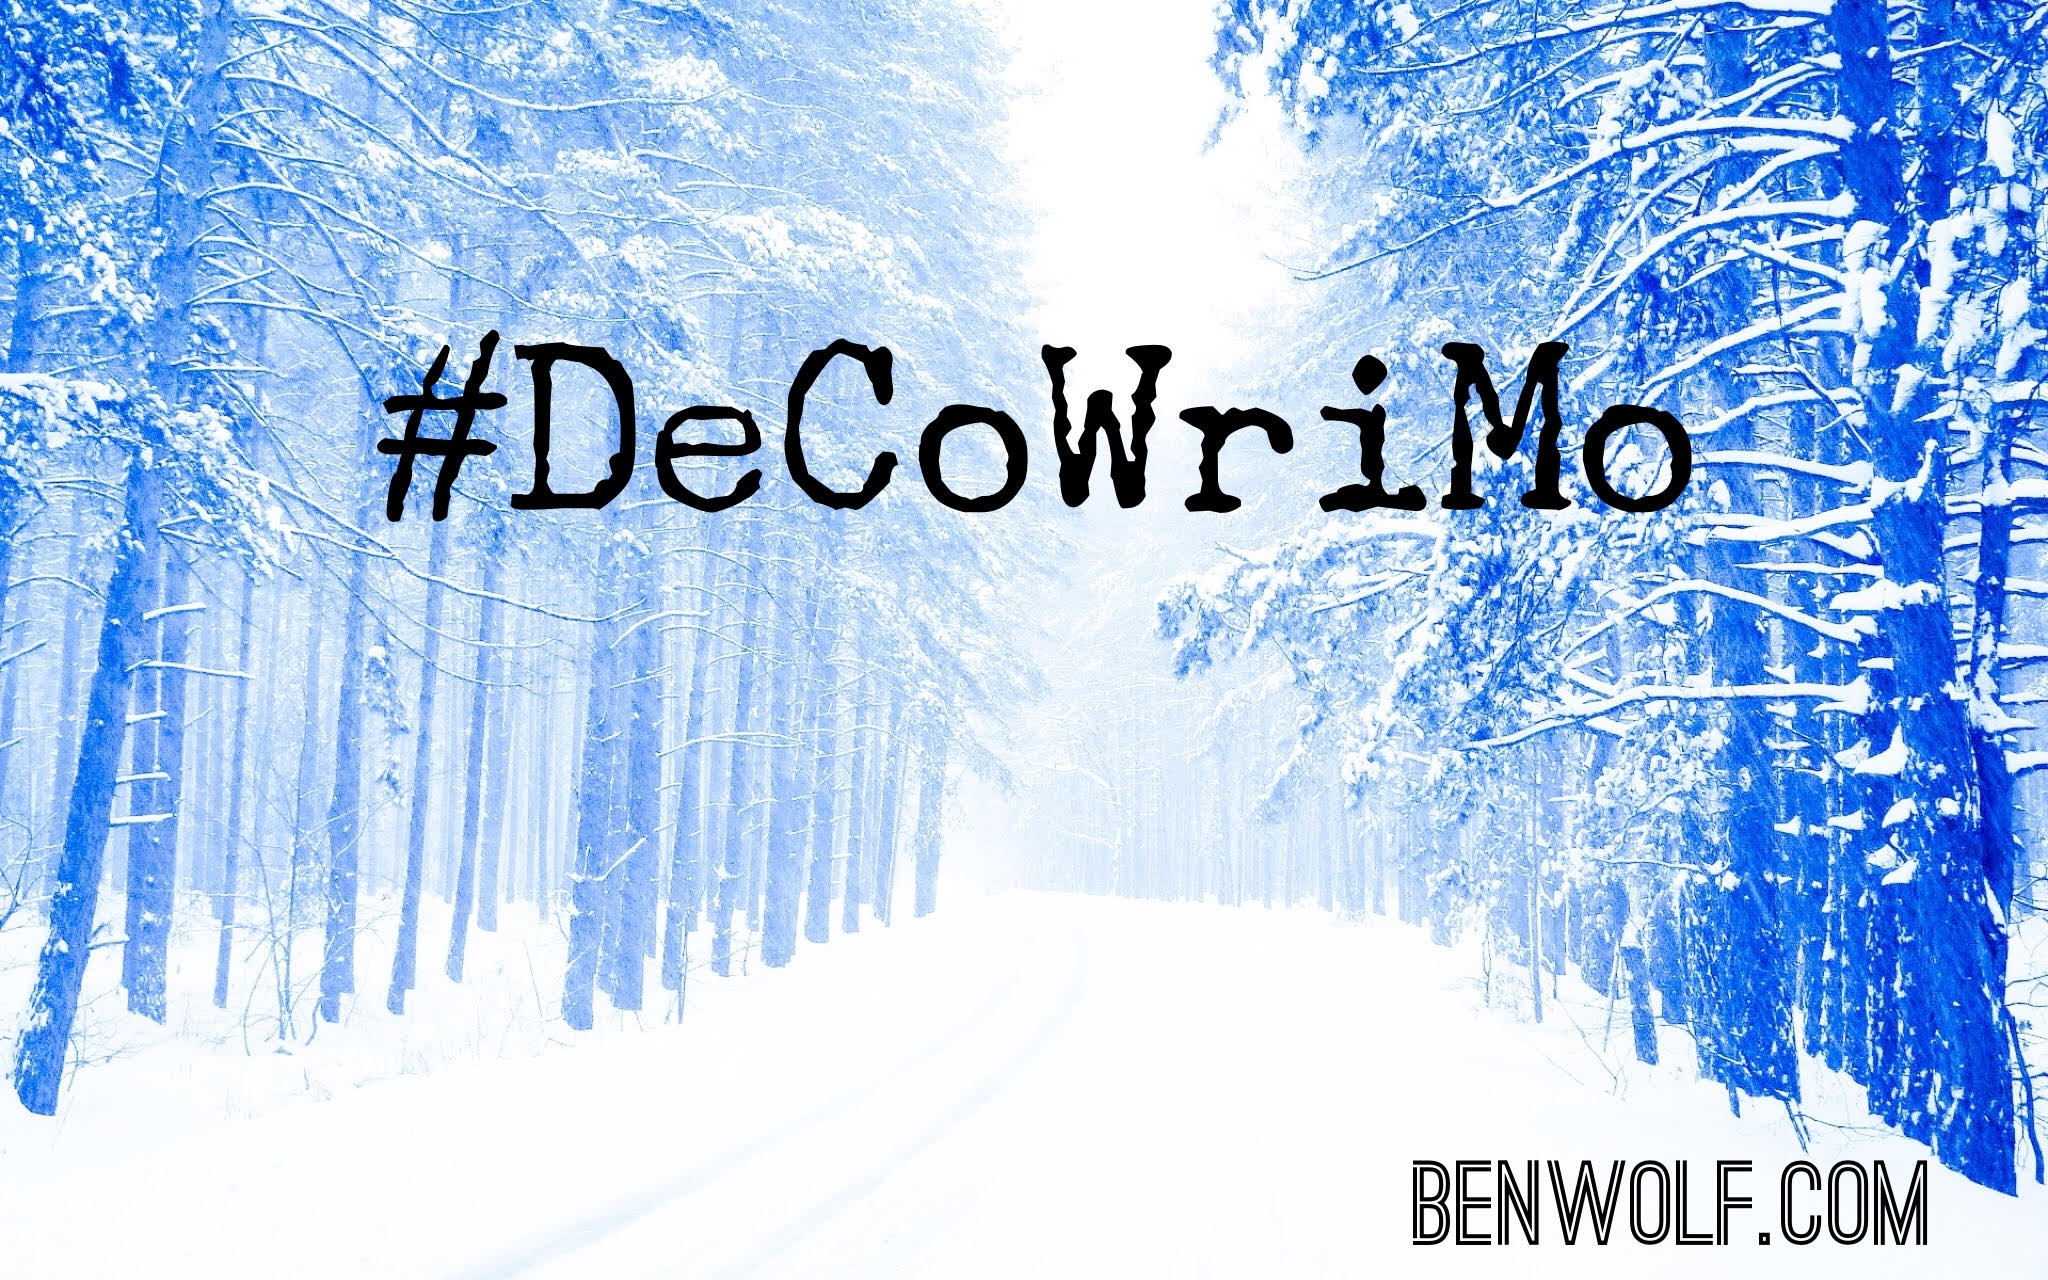 Beyond NaNoWriMo – A Challenge for Real Authors